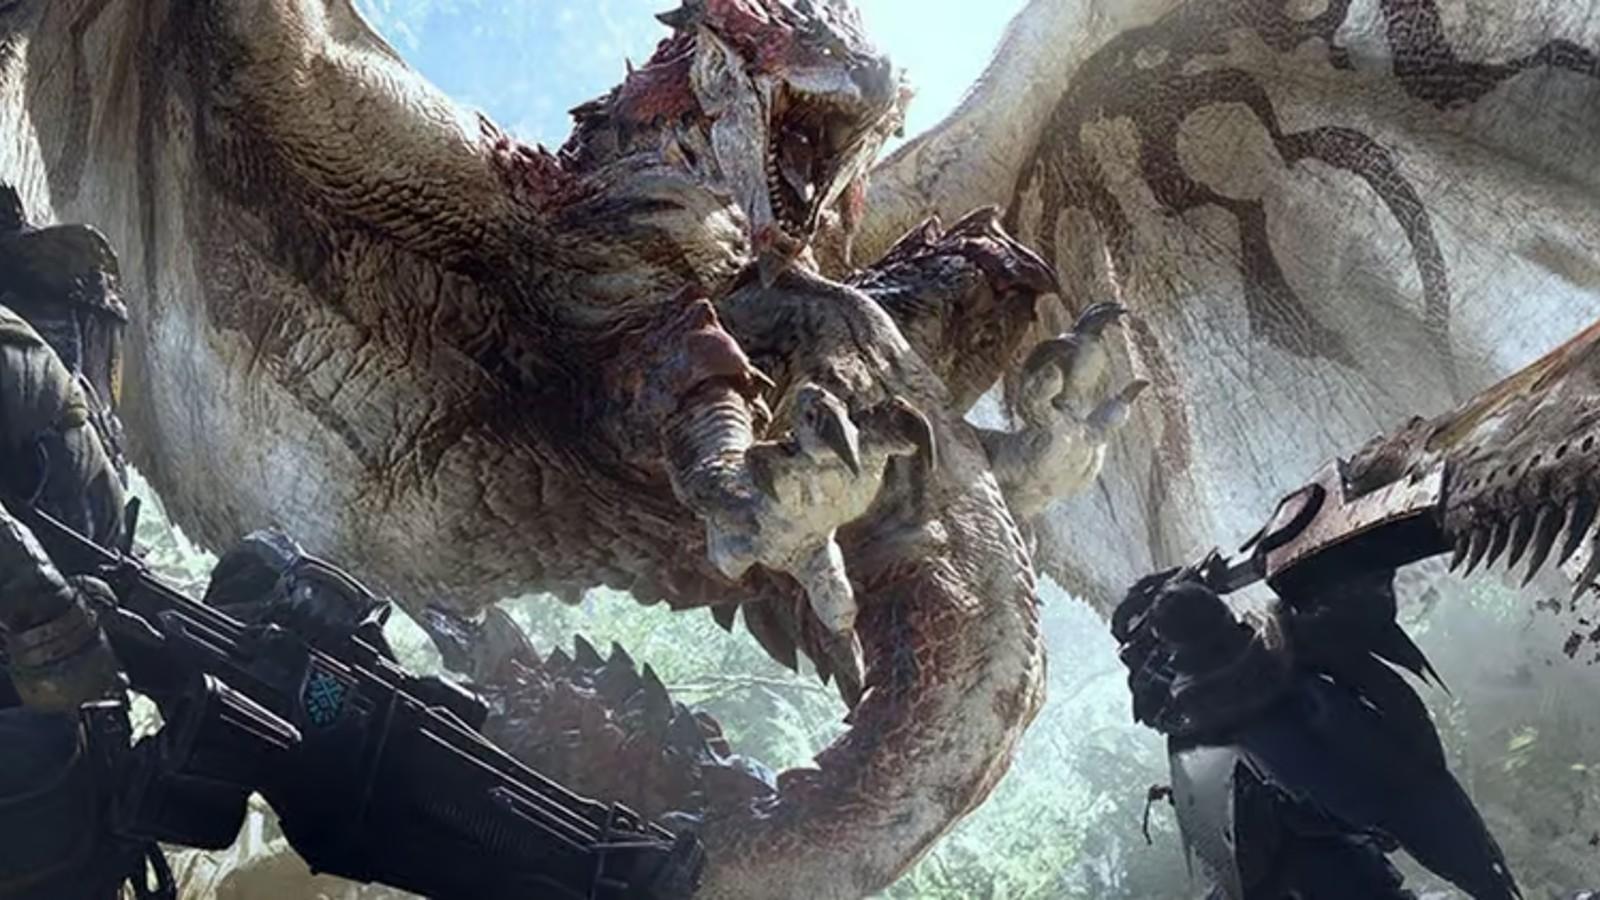 An image of a Monster from Monster Hunter Now.